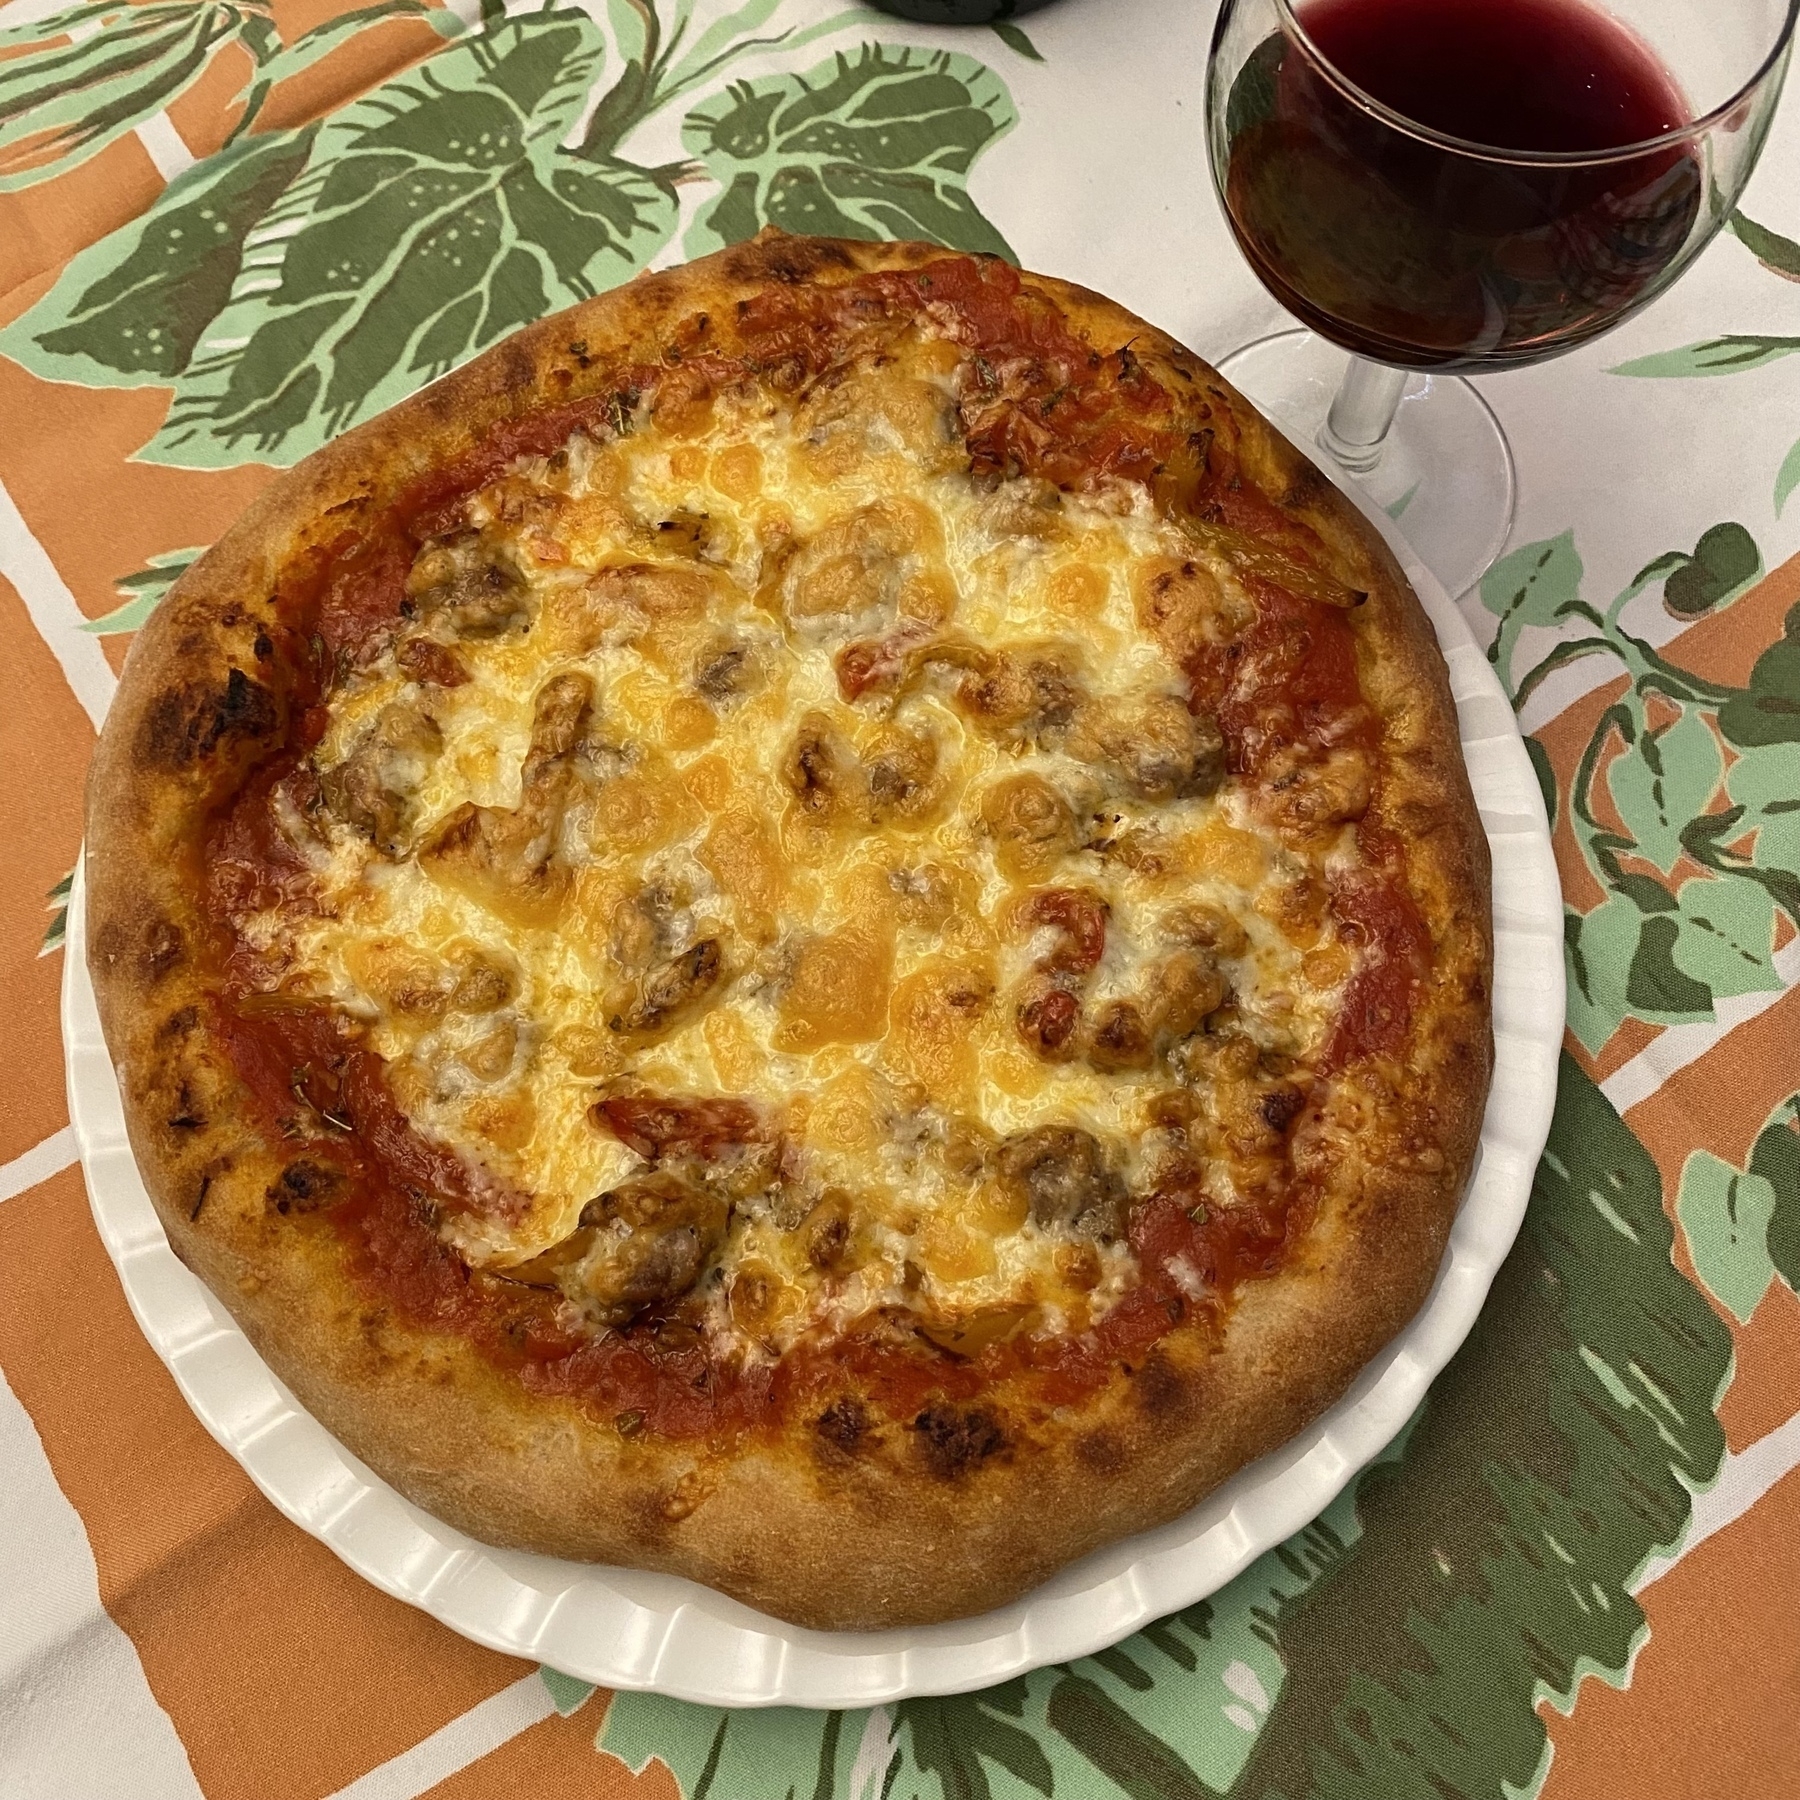 Small pizza on a white plate, sitting on a table cloth next to a glass of red wine.